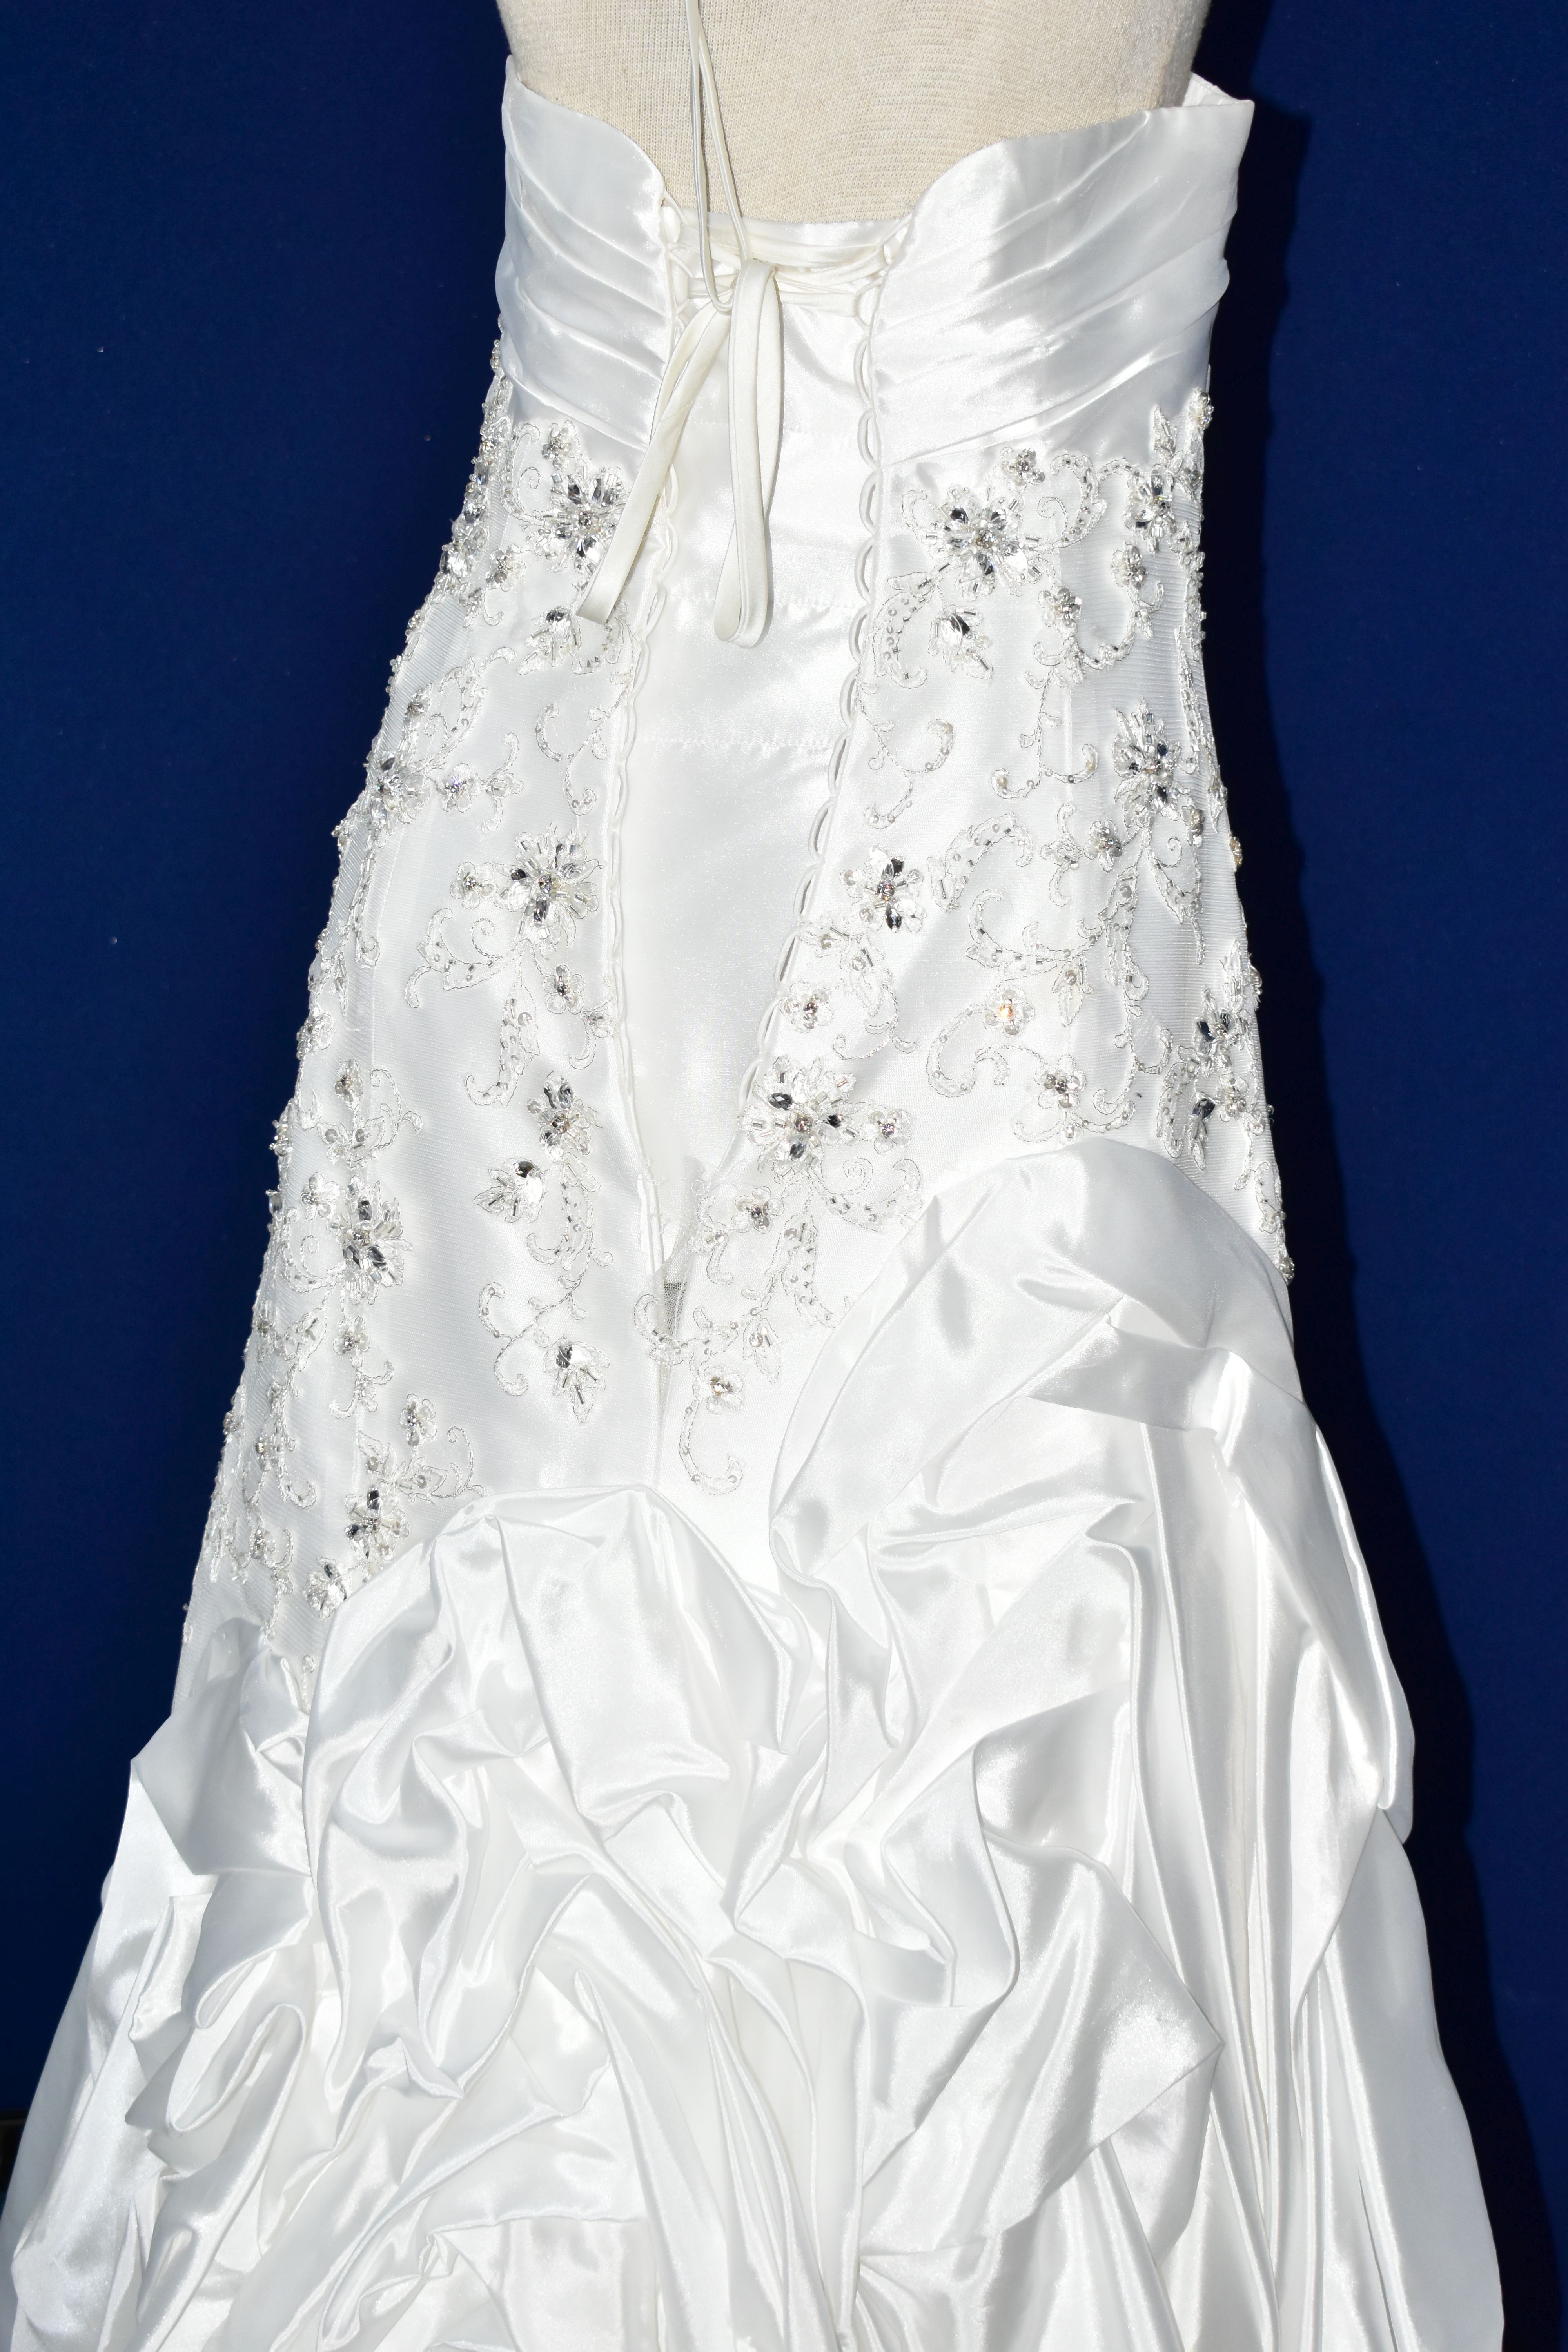 WEDDING GOWN, 'Sophia Tolli' white satin, size 8, strapless, ruched skirt, beaded detail on - Image 14 of 17